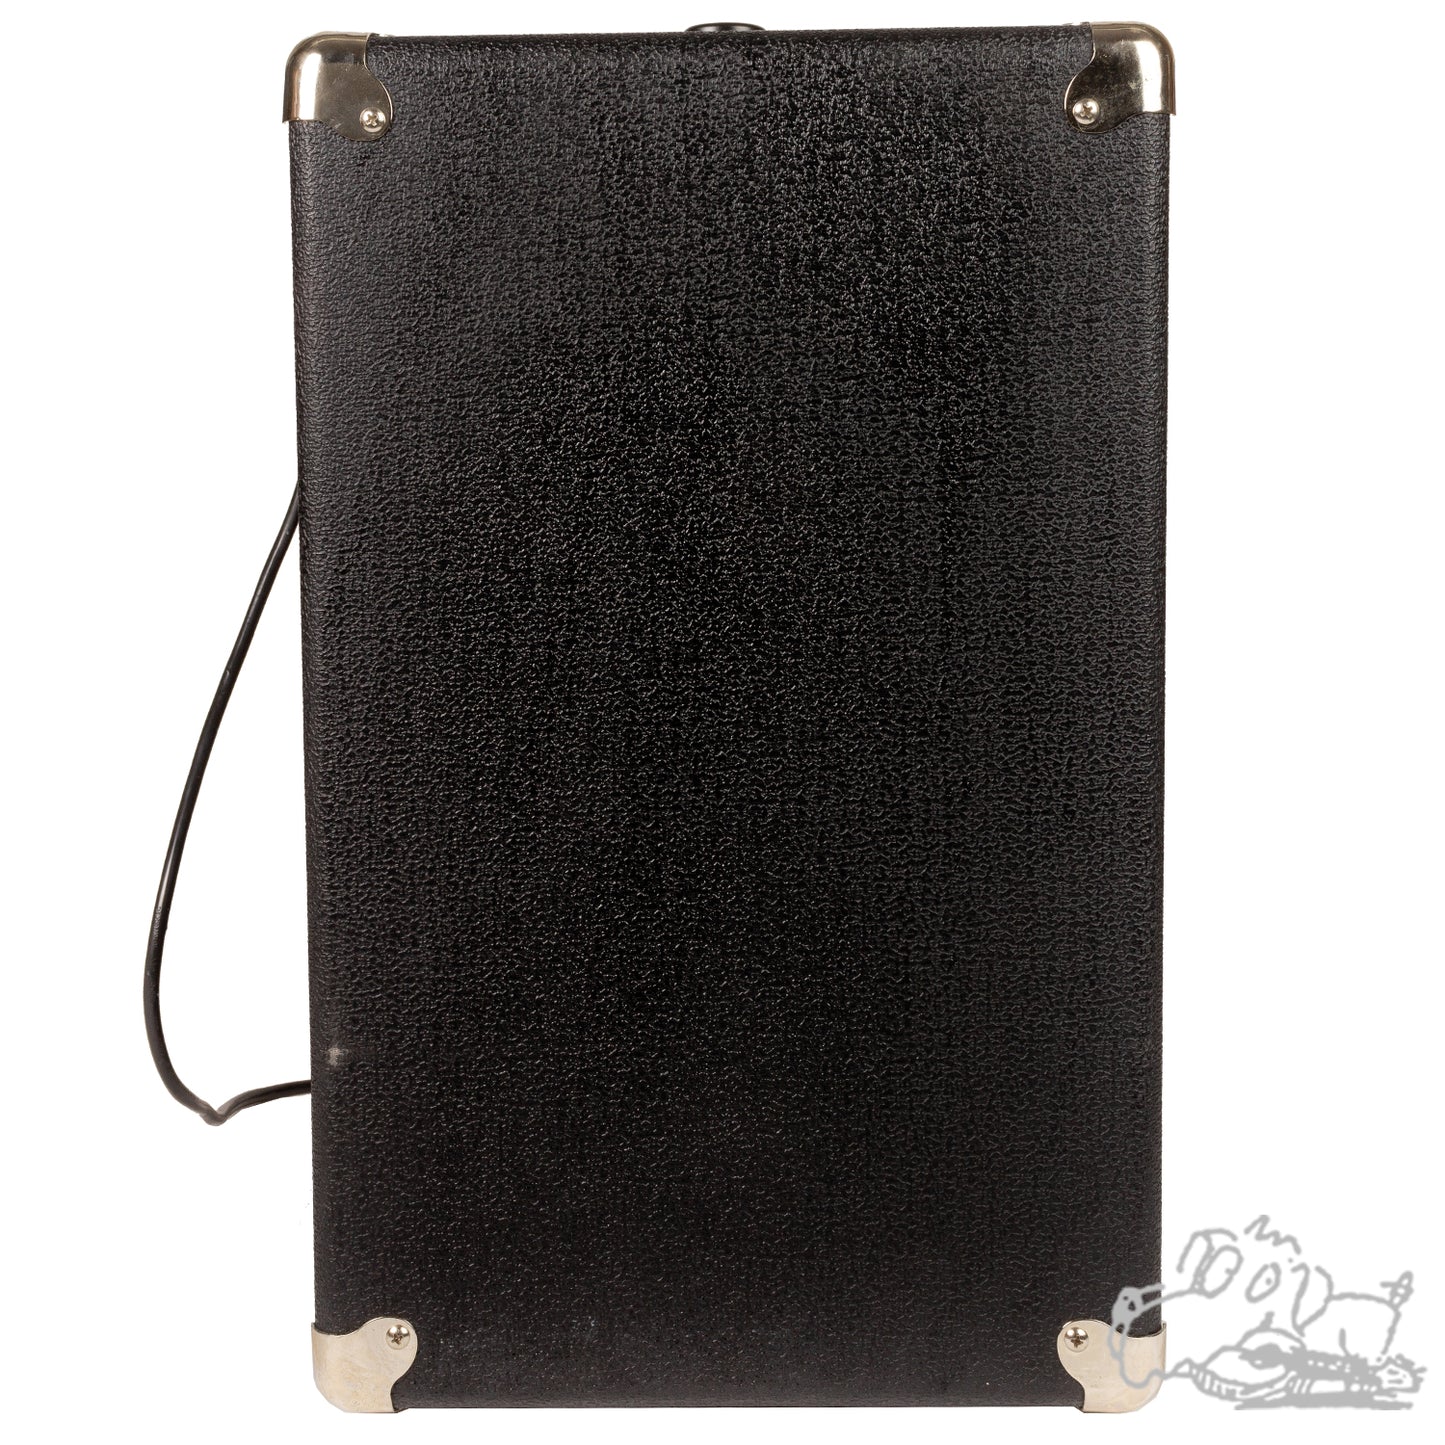 Used Acoustic B20 Bass Amplifier